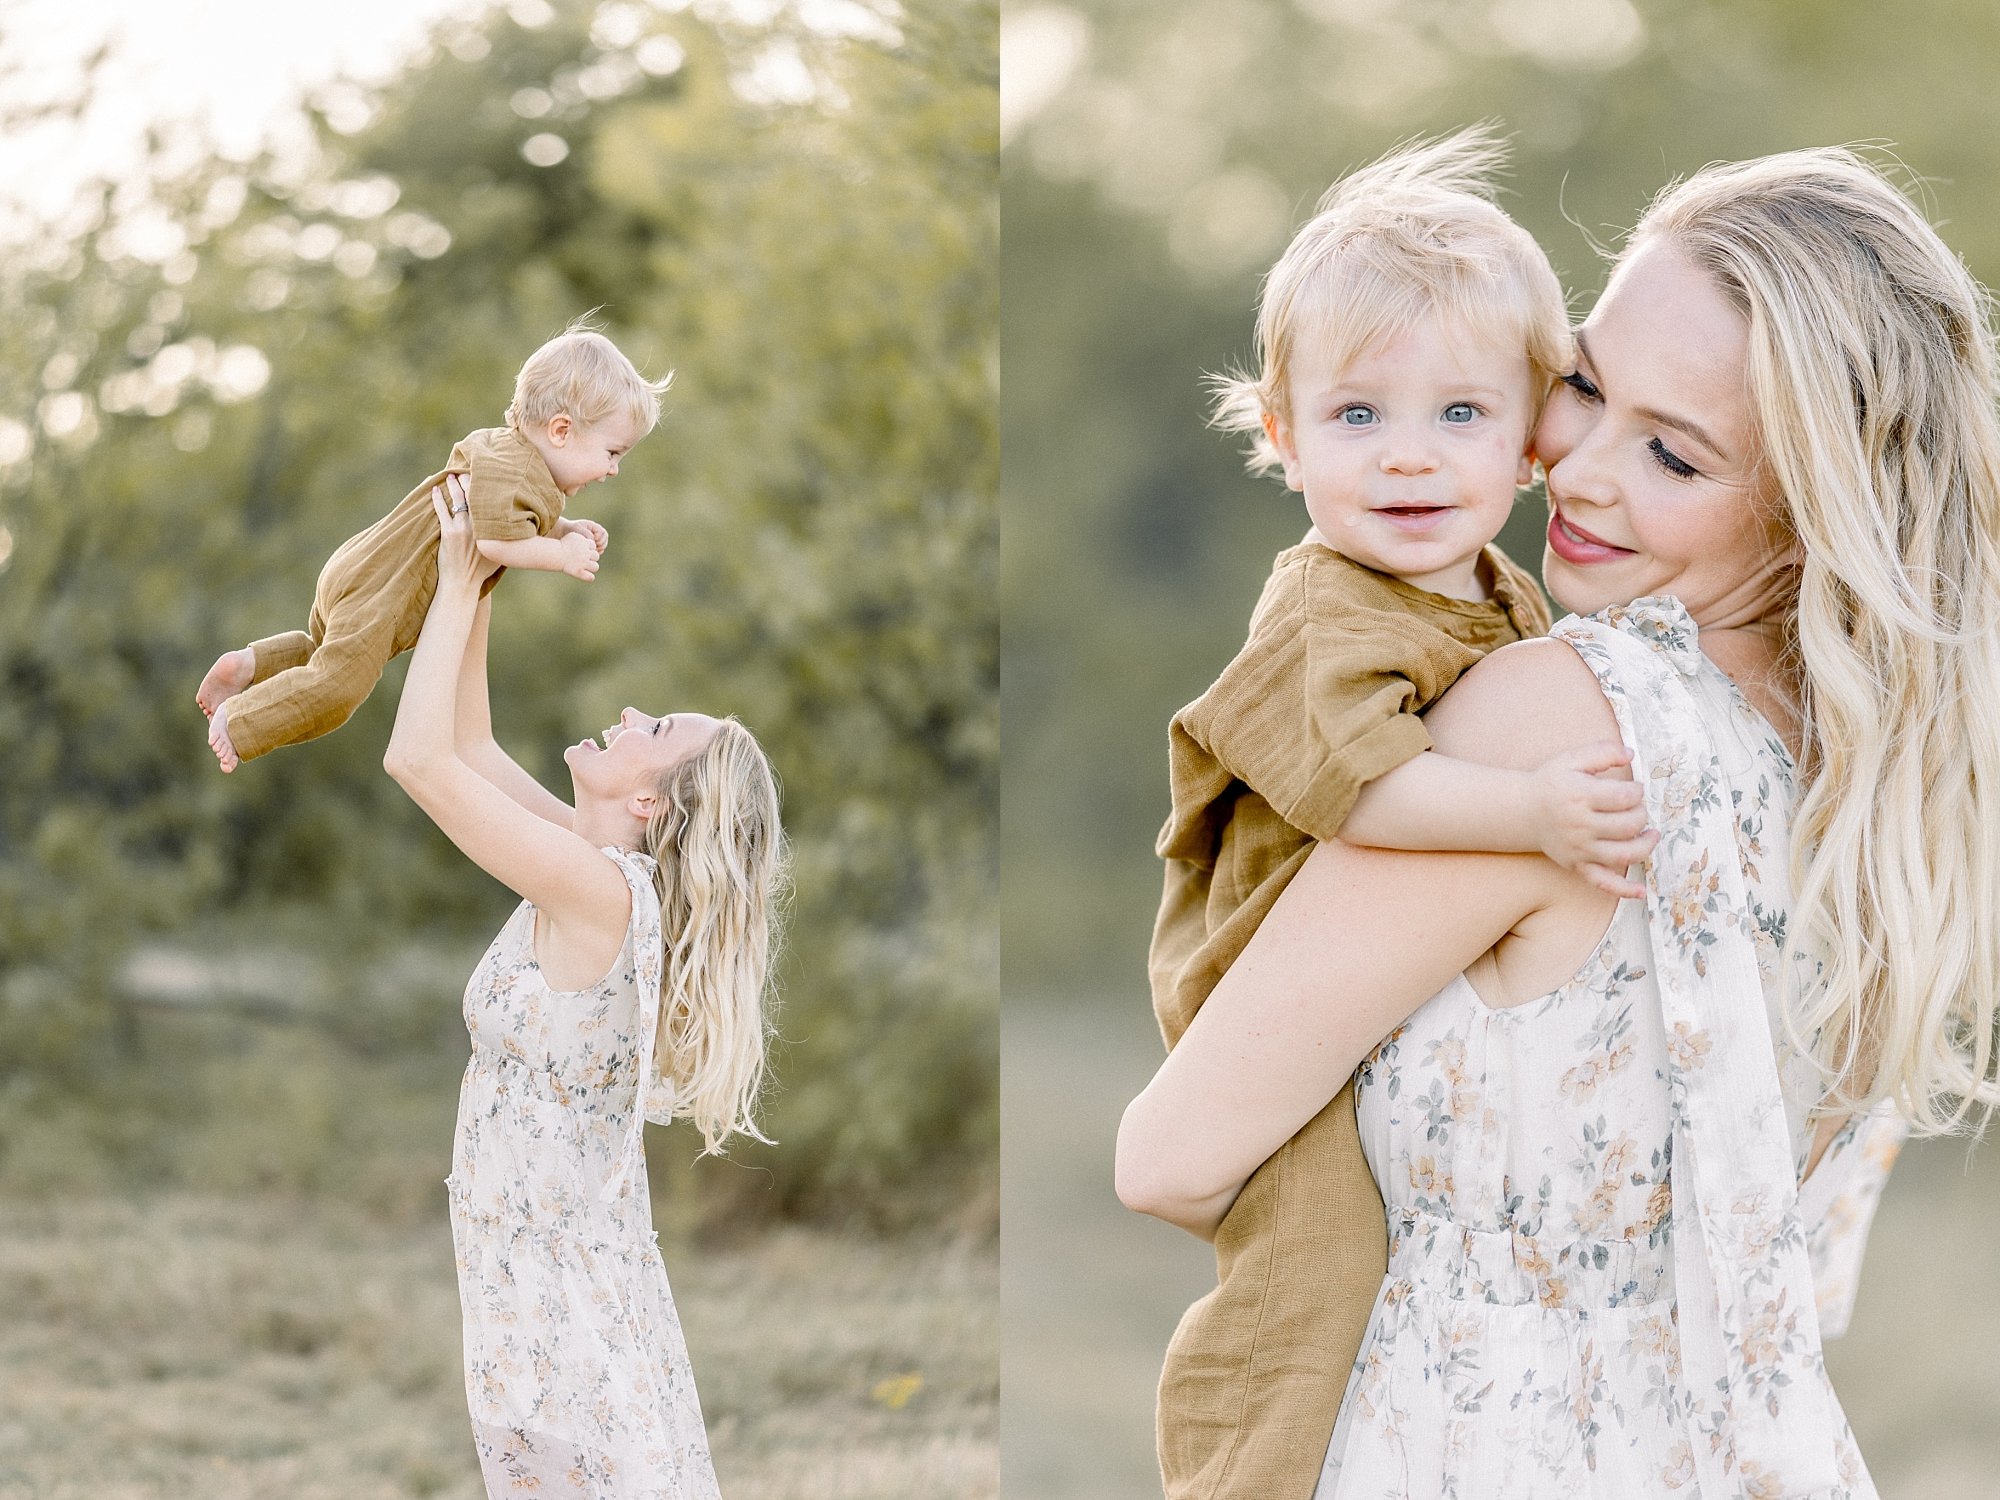 Dallas mom and son celebrating his first birthday during family photos